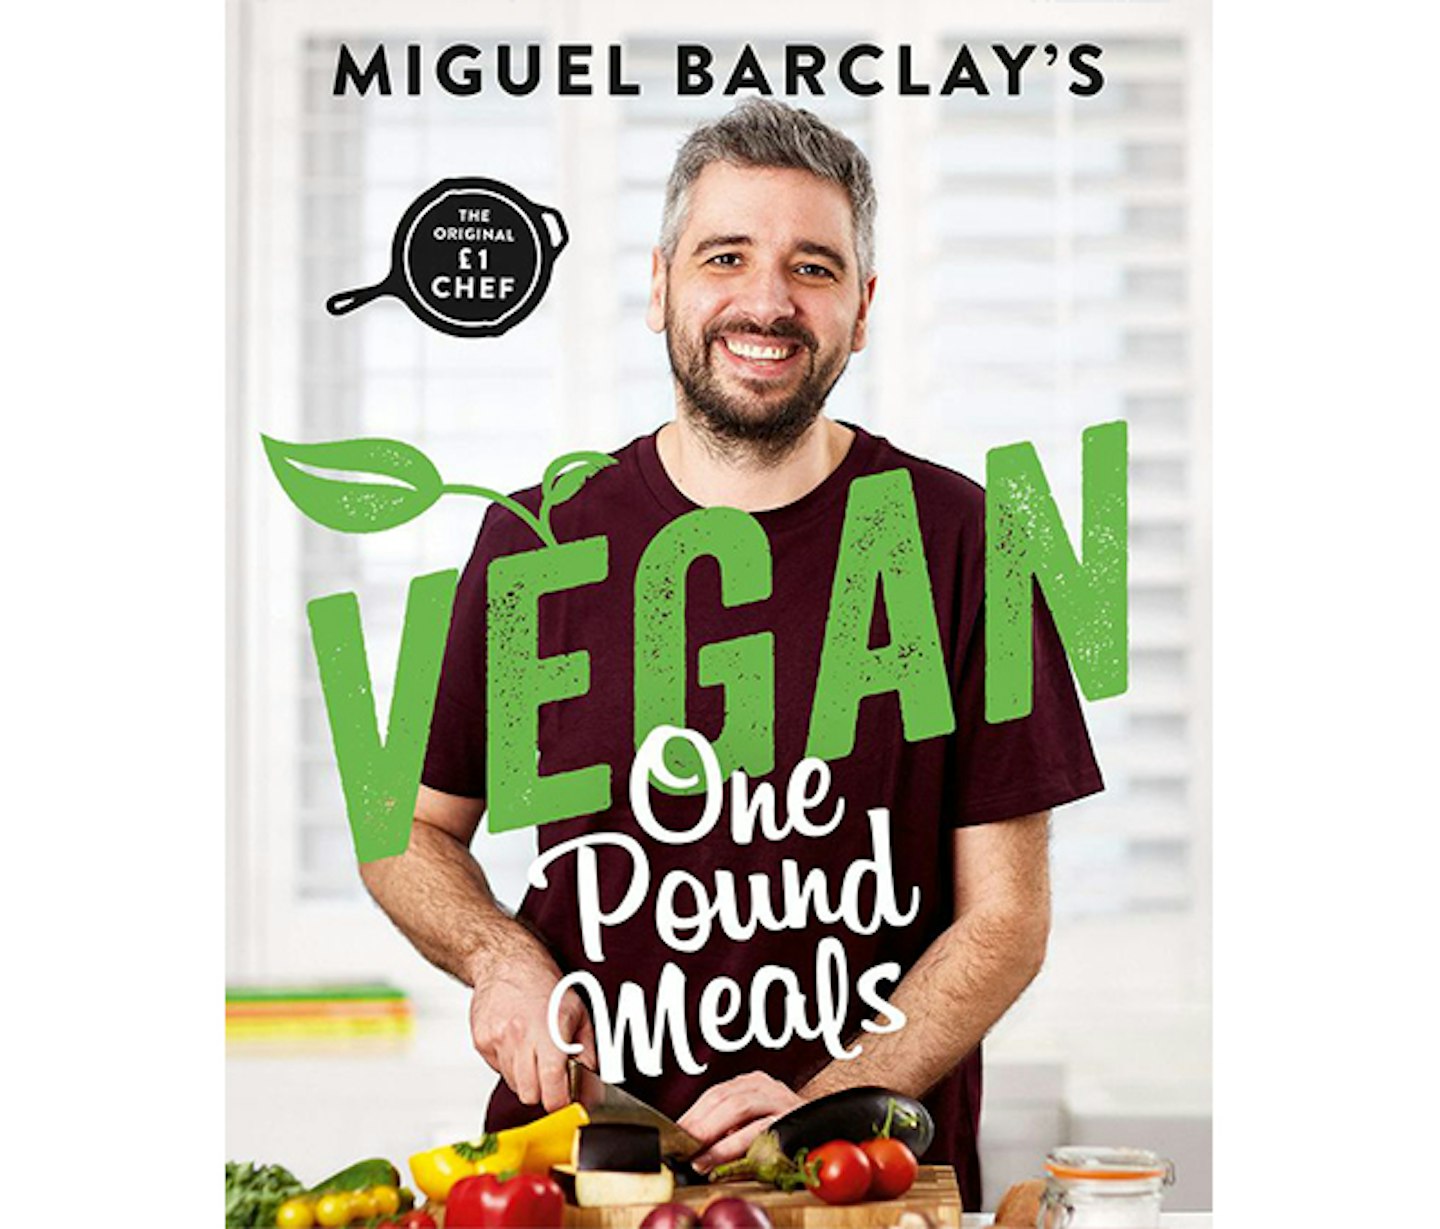 Vegan One Pound Meals by Miguel Barclay